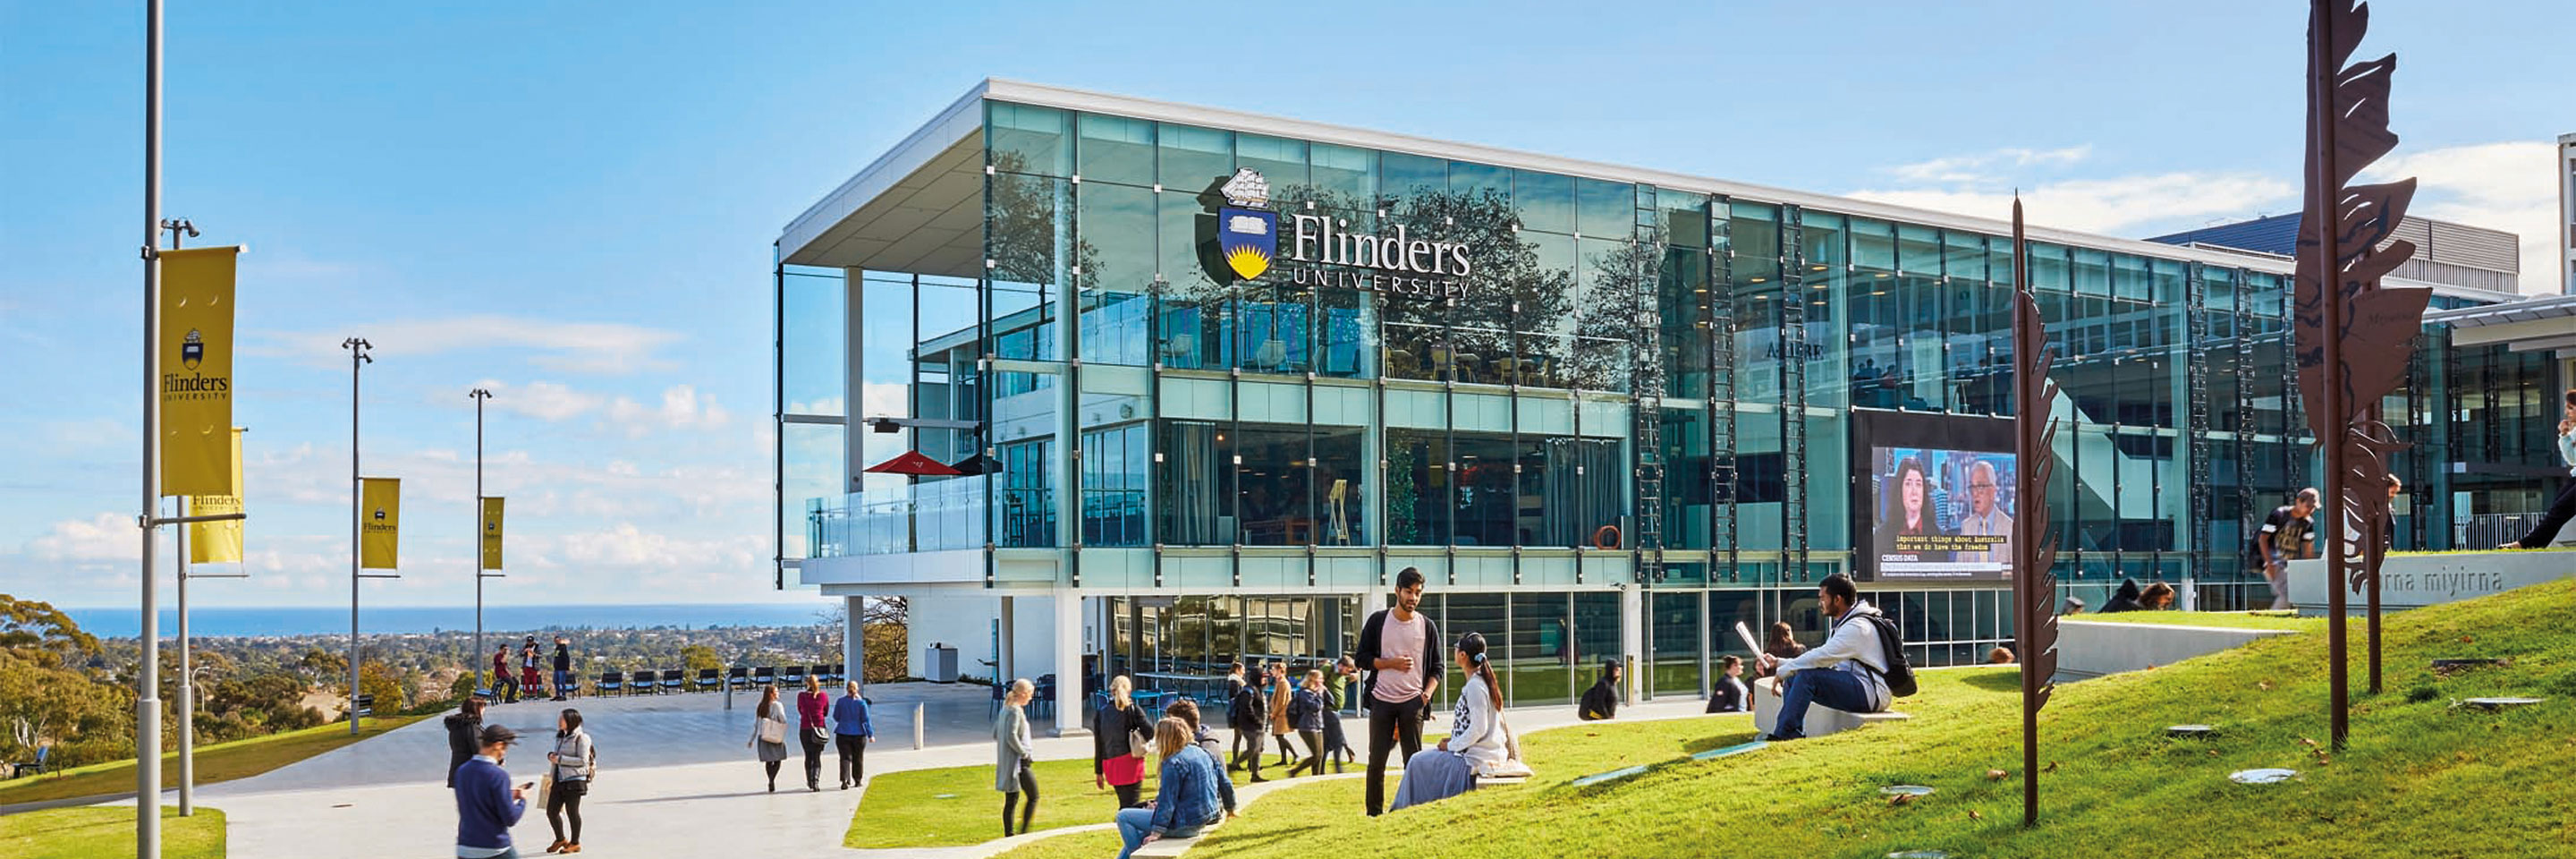 The Australia Awards are prestigious international scholarships that provide you with high-quality educational experiences at world-class universities (Photo courtesy of Flinders University).